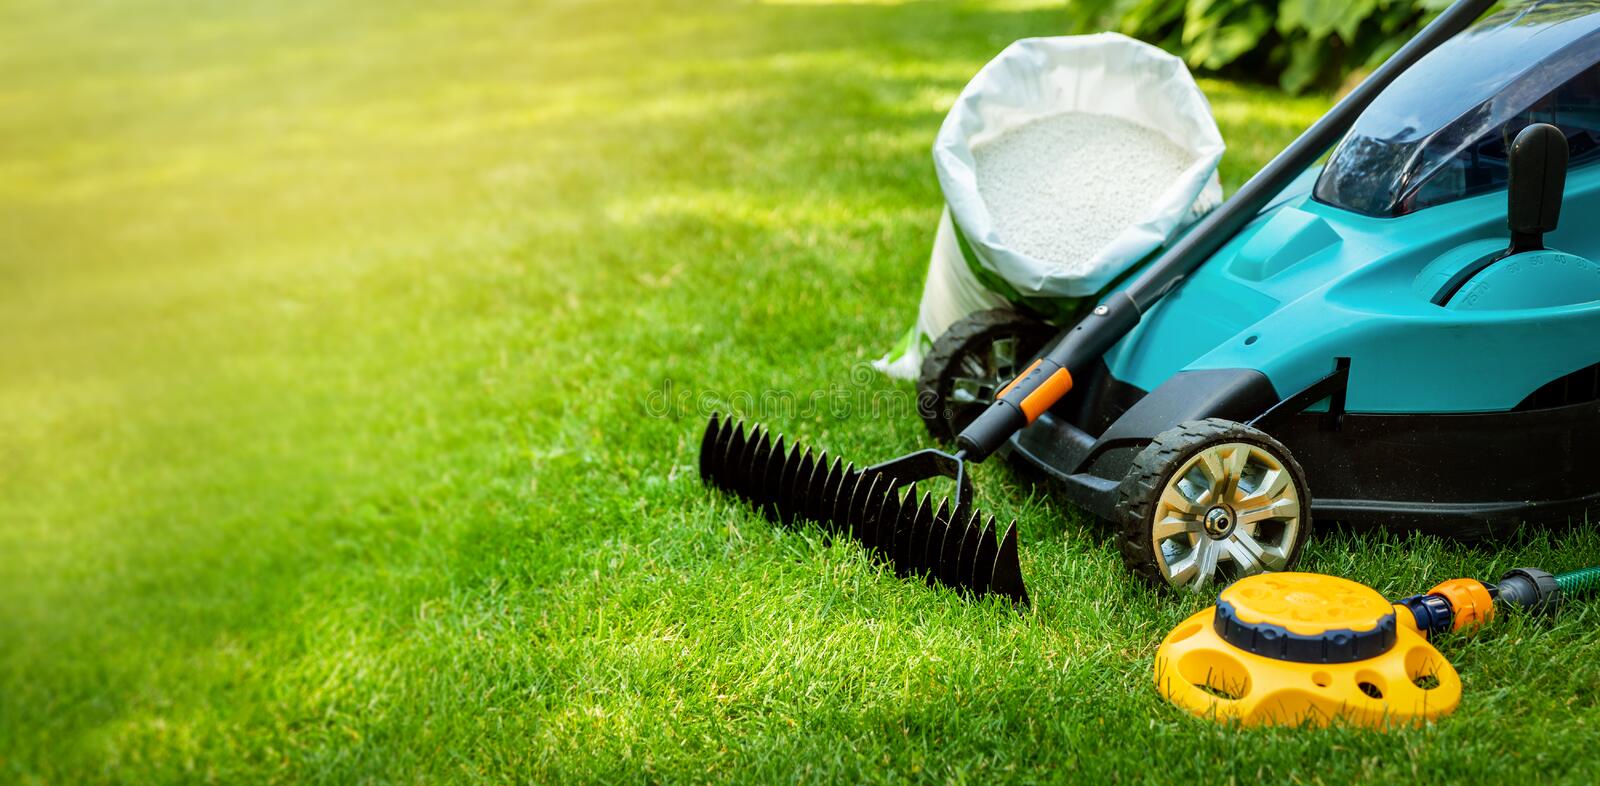 How To Get 50 New Customers For Your Lawn Care Business